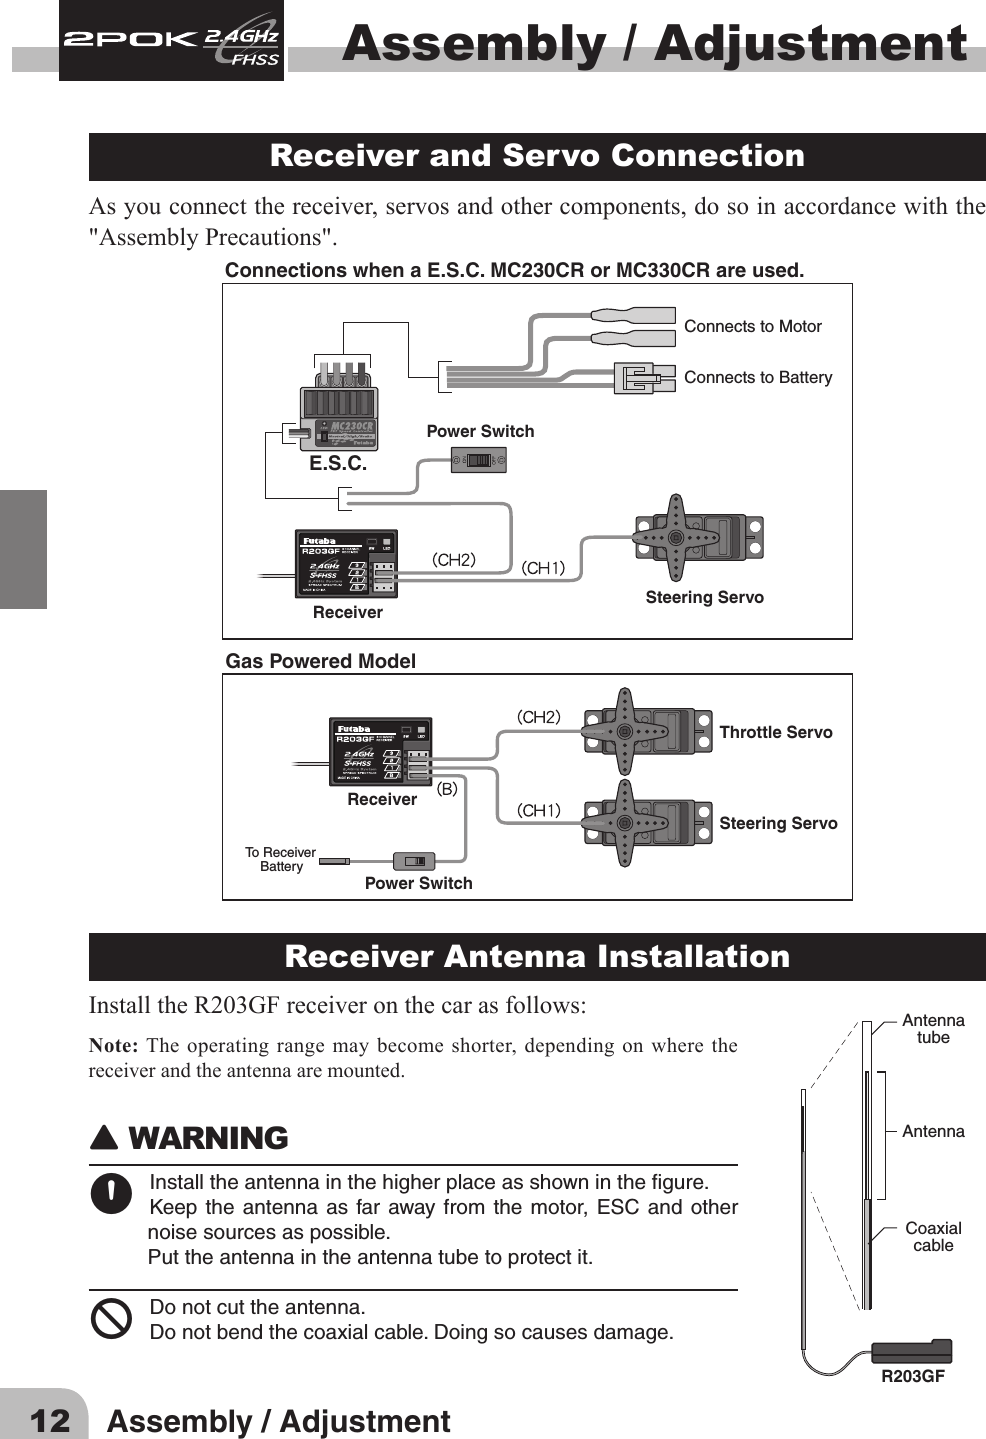 12 Assembly / AdjustmentAssembly / Adjustment Receiver and Servo Connection As you connect the receiver, servos and other components, do so in accordance with the &quot;Assembly Precautions&quot;. Connections when a E.S.C. MC230CR or MC330CR are used.Steering ServoThrottle ServoReceiverReceiverPower SwitchTo Receiver    BatterySteering ServoE.S.C.Power SwitchConnects to MotorConnects to BatteryGas Powered ModelReceiver Antenna InstallationInstalltheR203GFreceiveronthecarasfollows:Note: The operating range may become shorter, depending on where the receiver and the antenna are mounted.󾙈WARNING 󾙊Installtheantennainthehigherplaceasshowninthegure.Keepthe antennaas farawayfrom the motor, ESC and othernoisesourcesaspossible.Puttheantennaintheantennatubetoprotectit.󾛻Donotcuttheantenna.Donotbendthecoaxialcable.Doingsocausesdamage.AntennatubeAntennaCoaxialcableR203GF